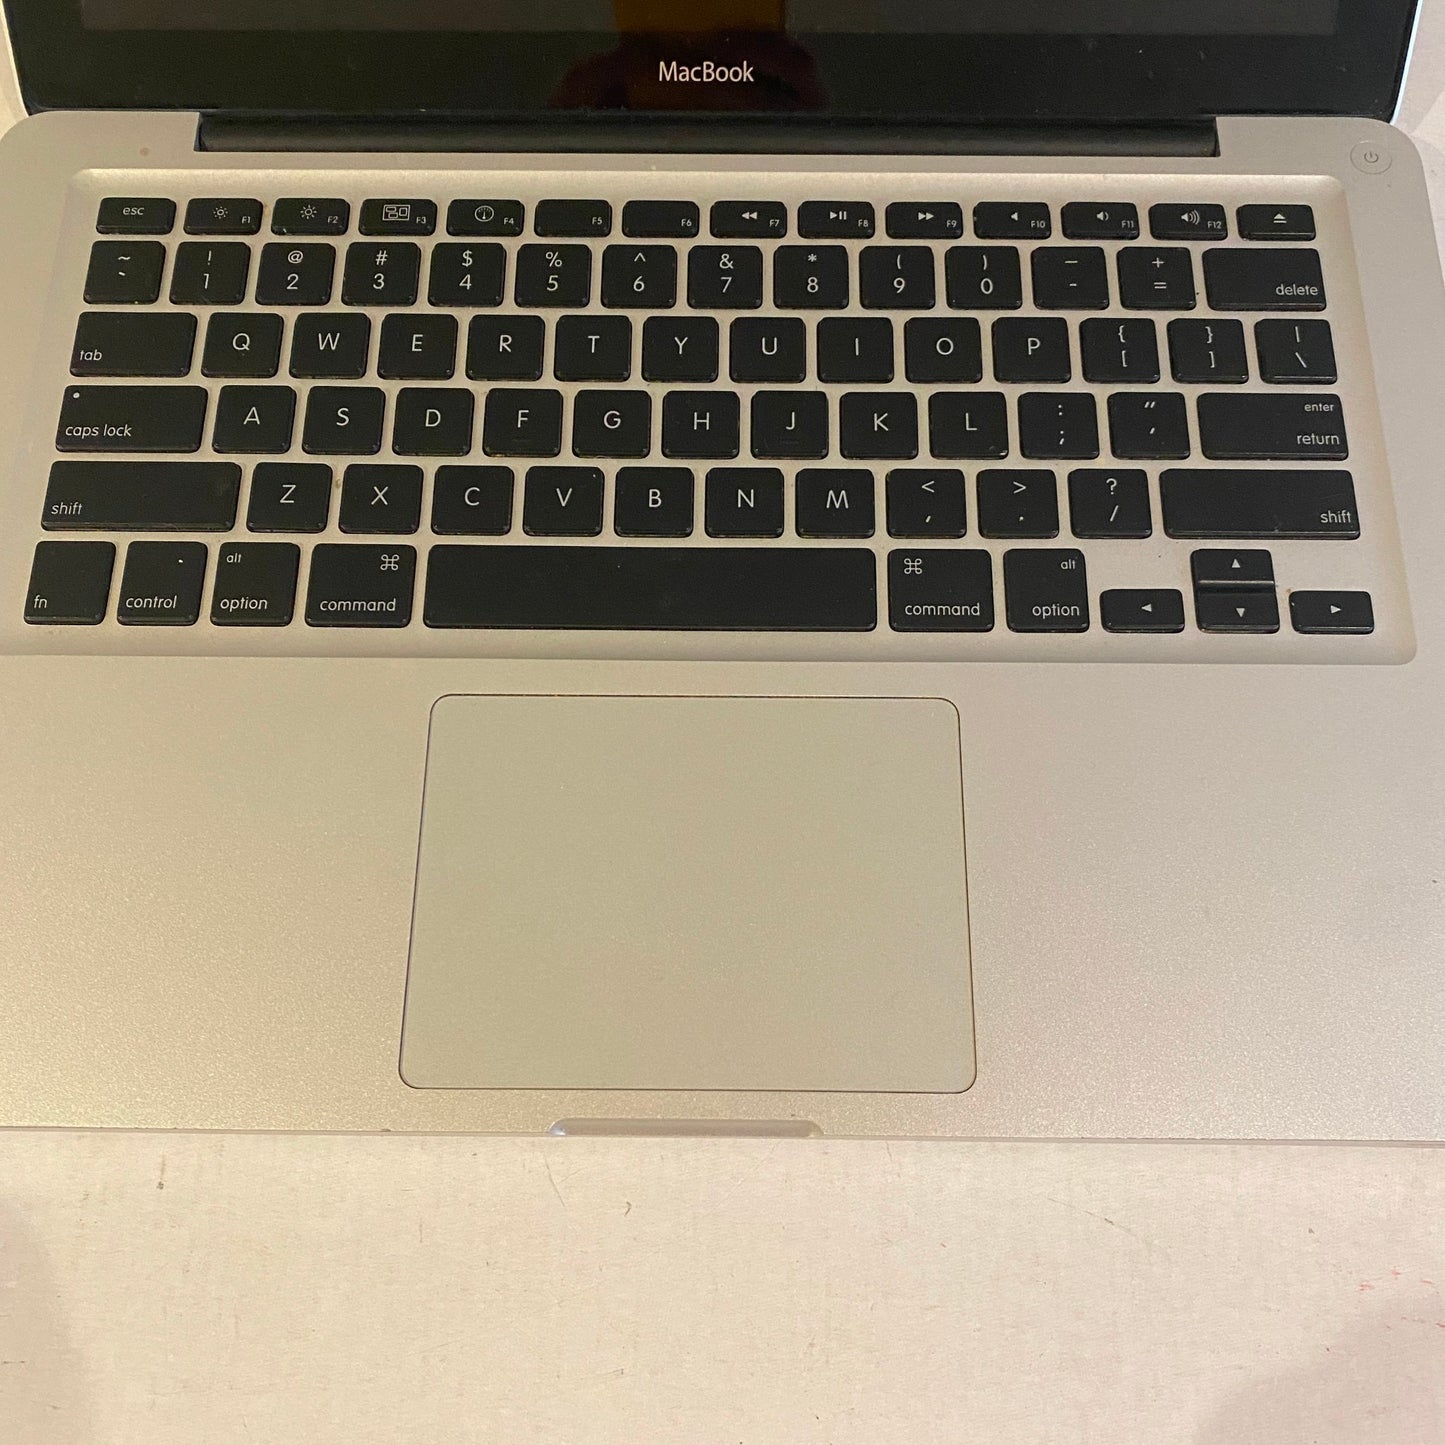 For Parts - 2008 Macbook No HDD - A1278